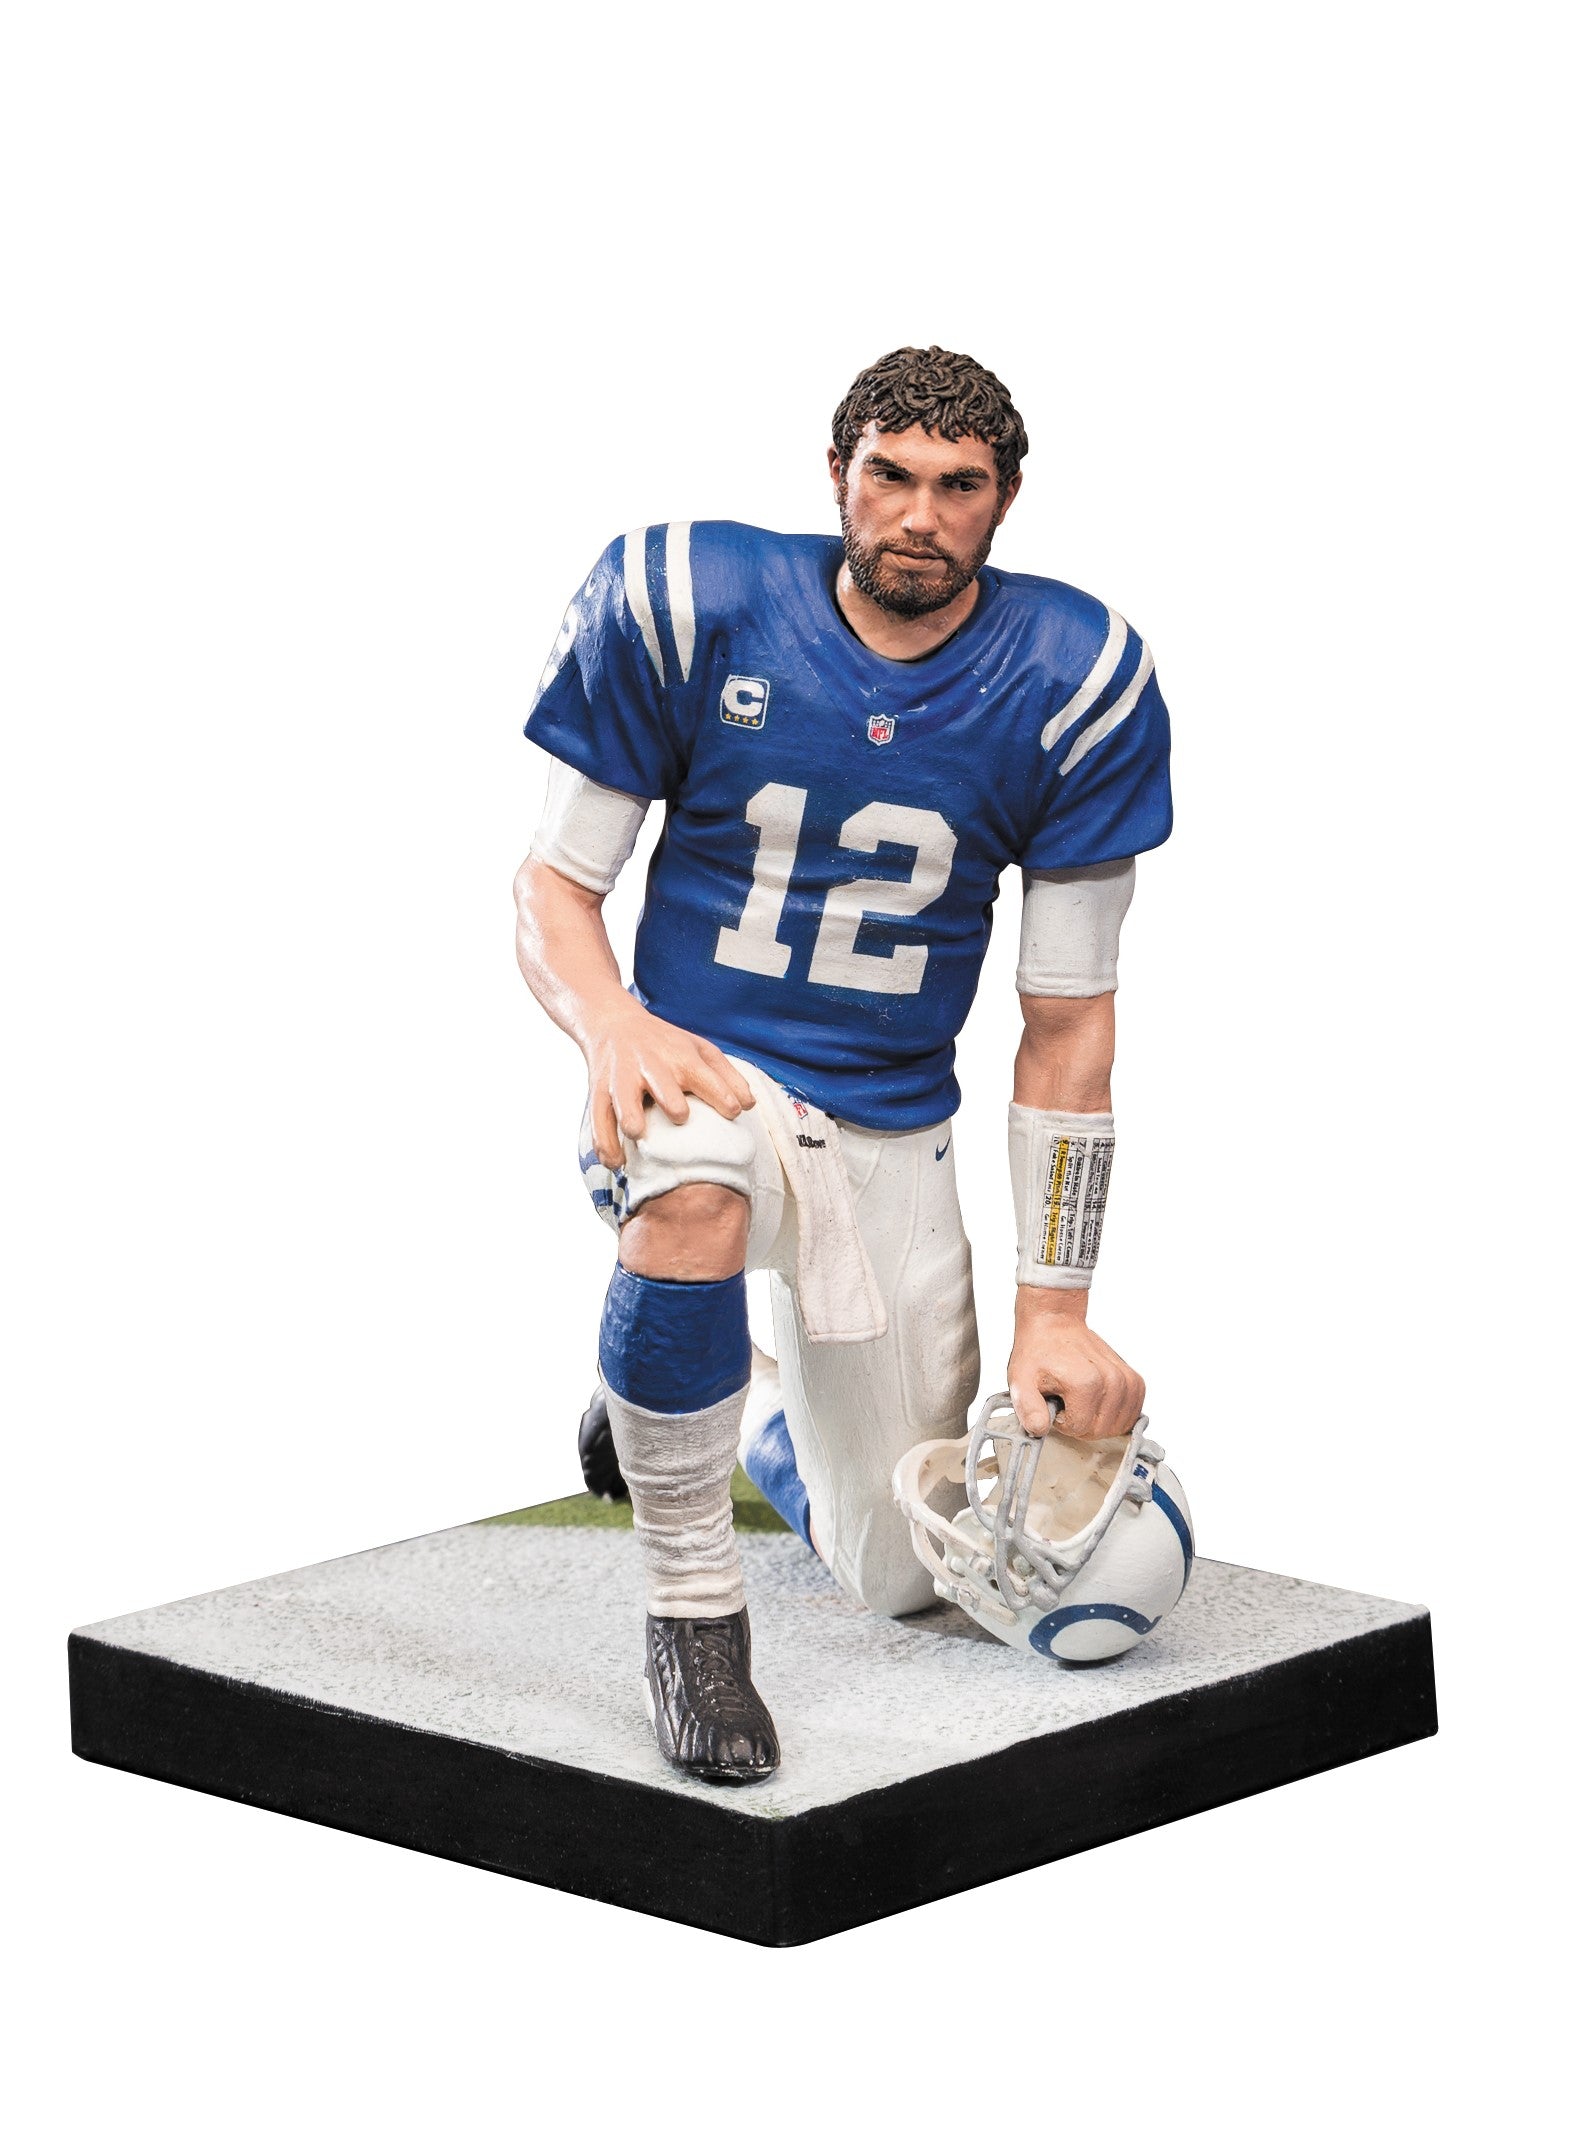 NFL Football series 36 ANDREW LUCK action figure